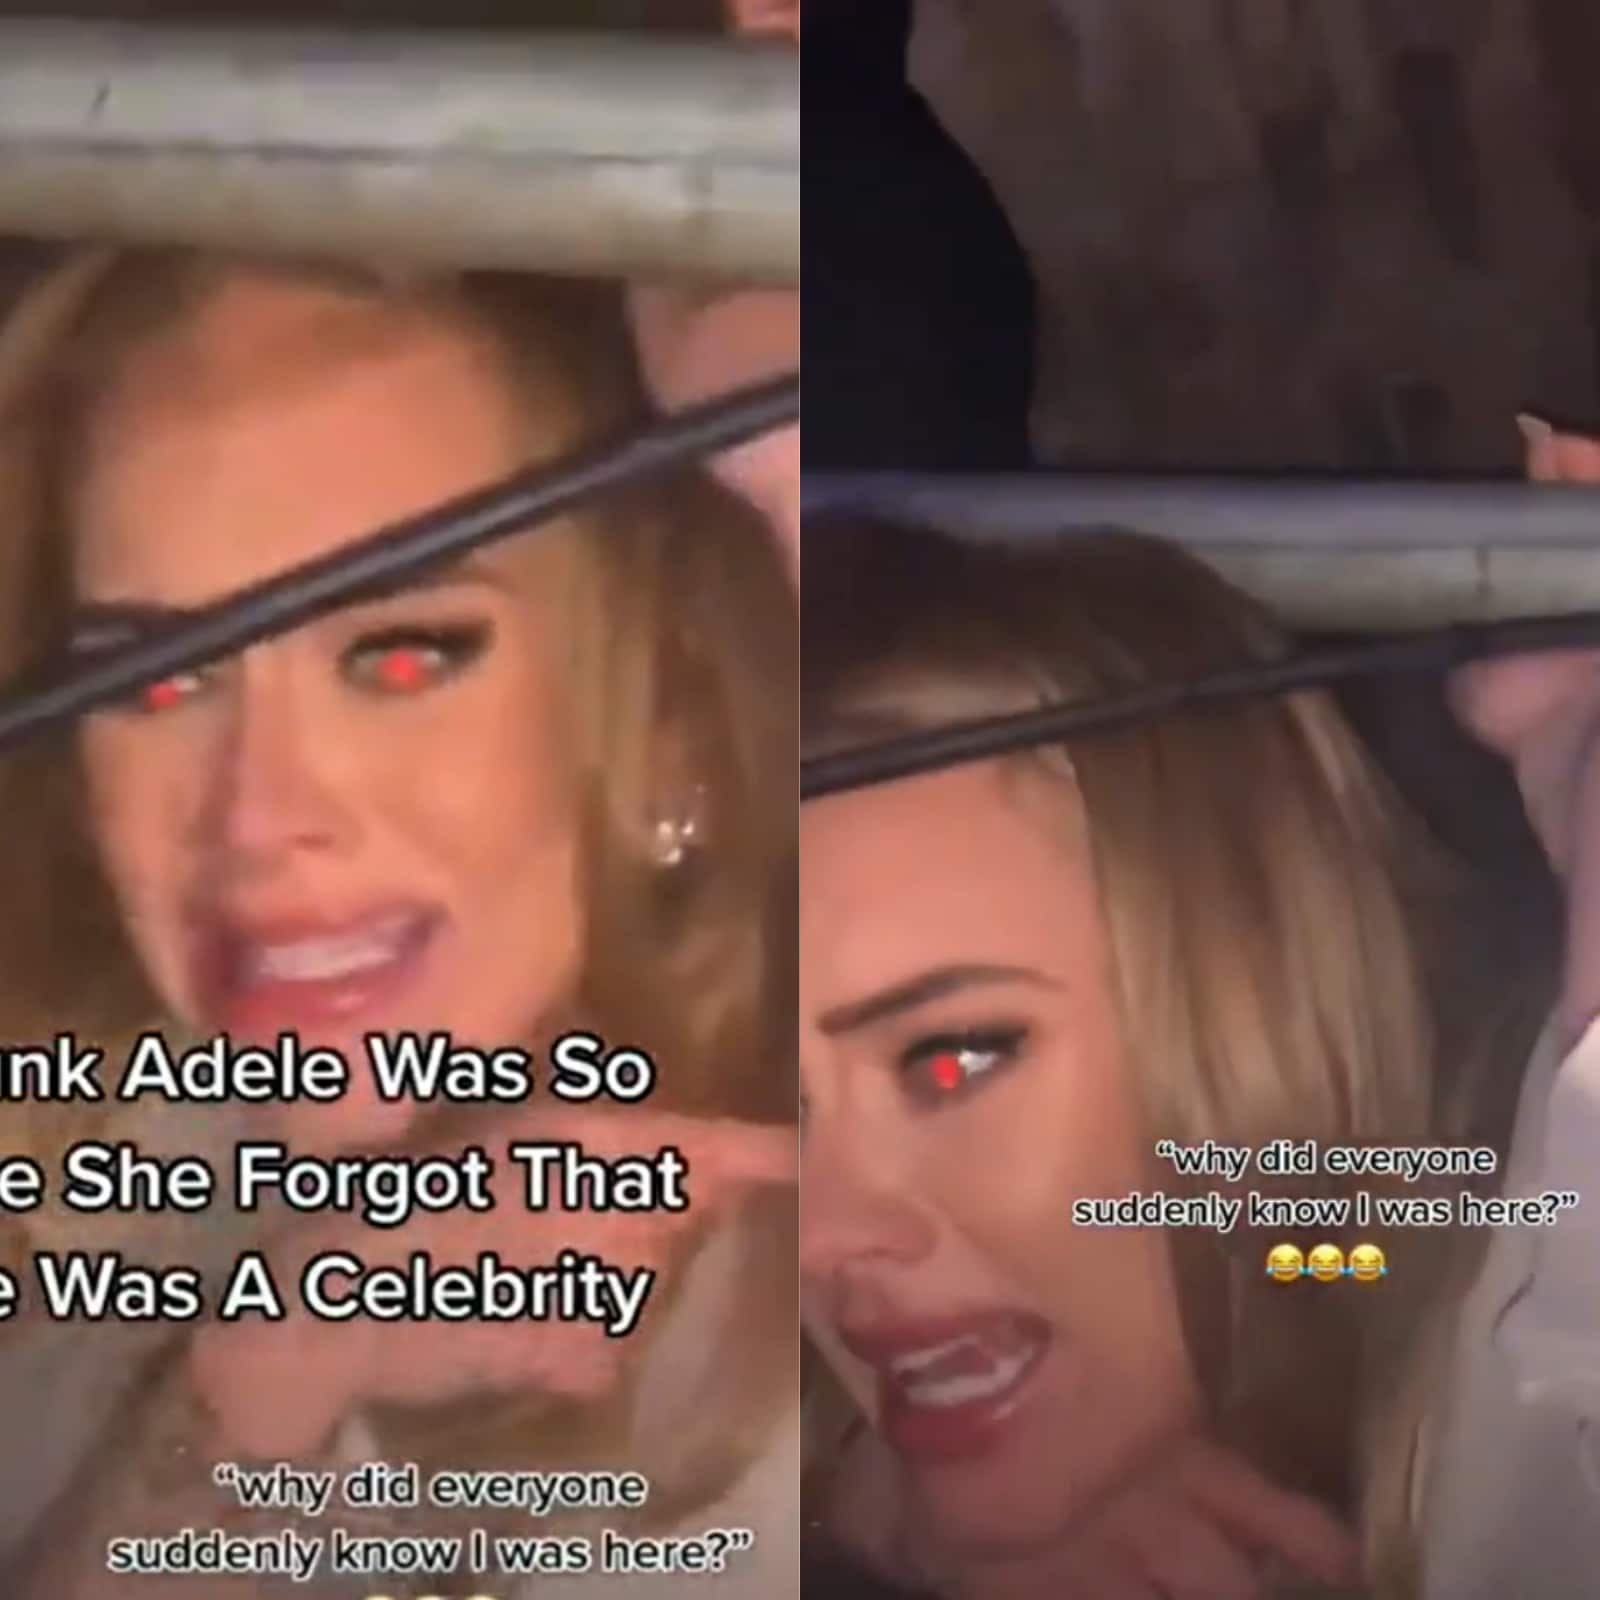 Adele Porn Captions - How Does Everyone Know?' Adele Temporarily Forgets She is Famous During  'Drunk' Night Out